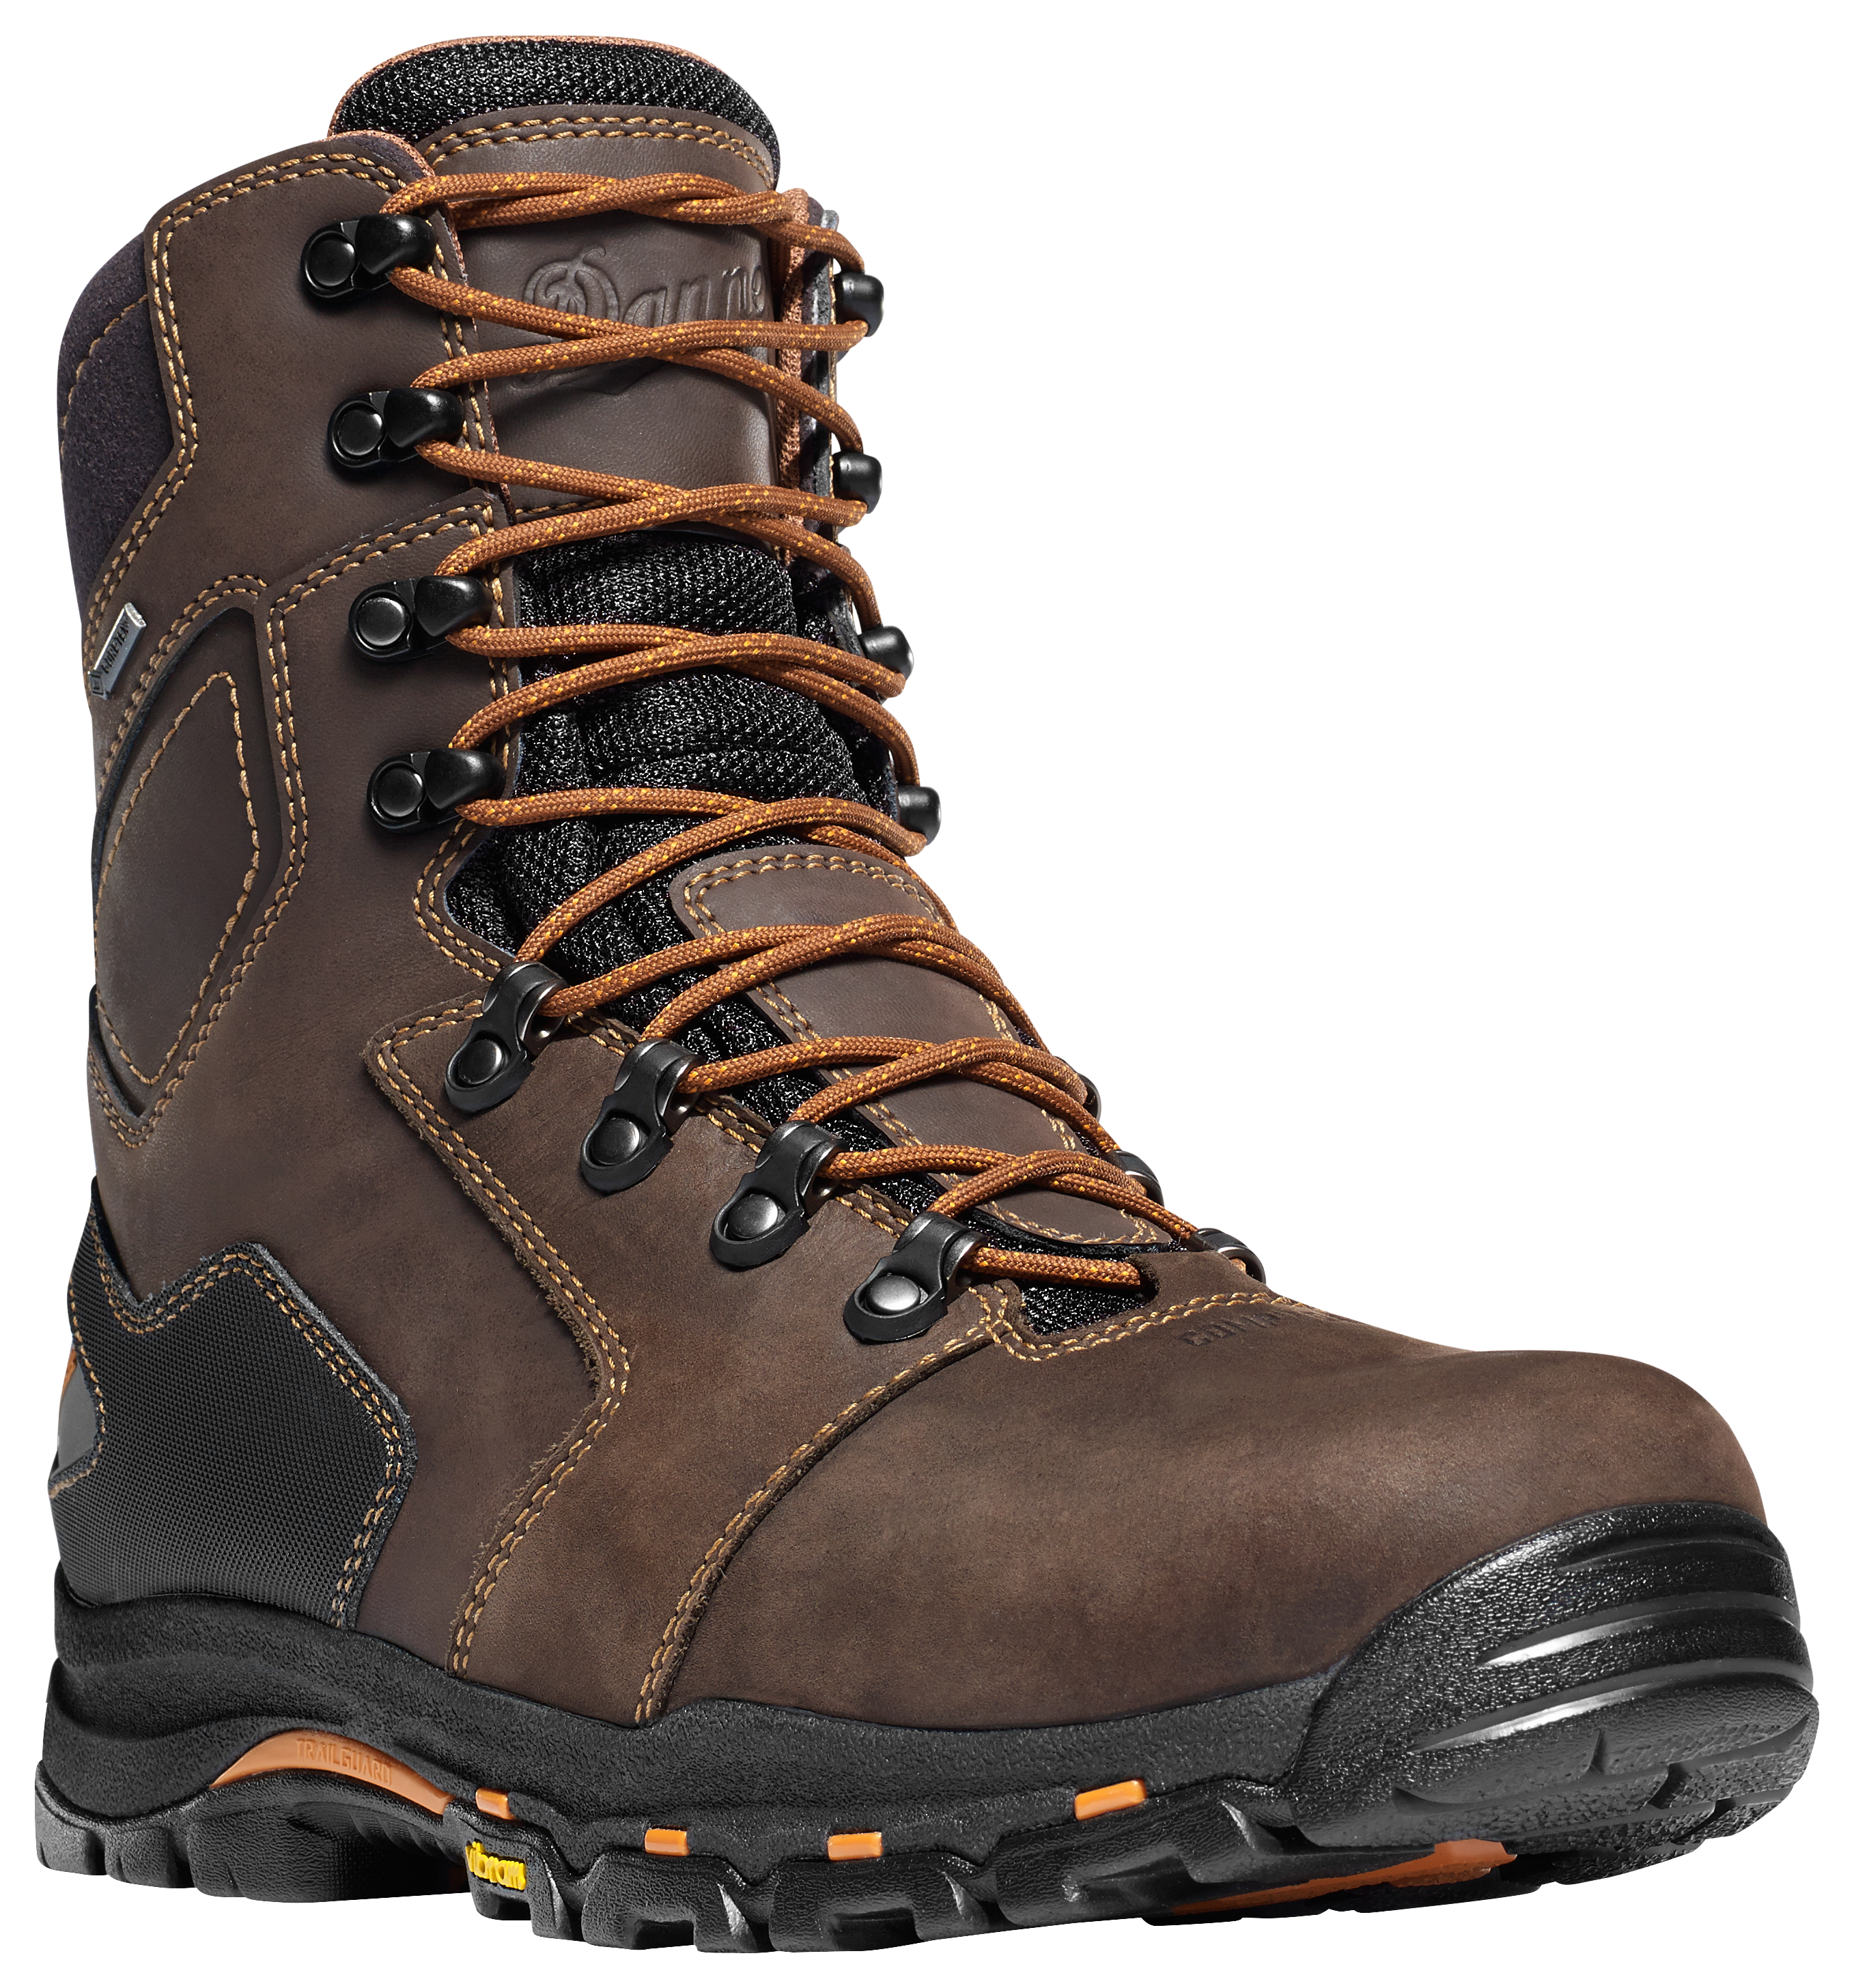 Danner Vicious GORE-TEX Composite Toe Work Boots for Men - Brown - 11.5W